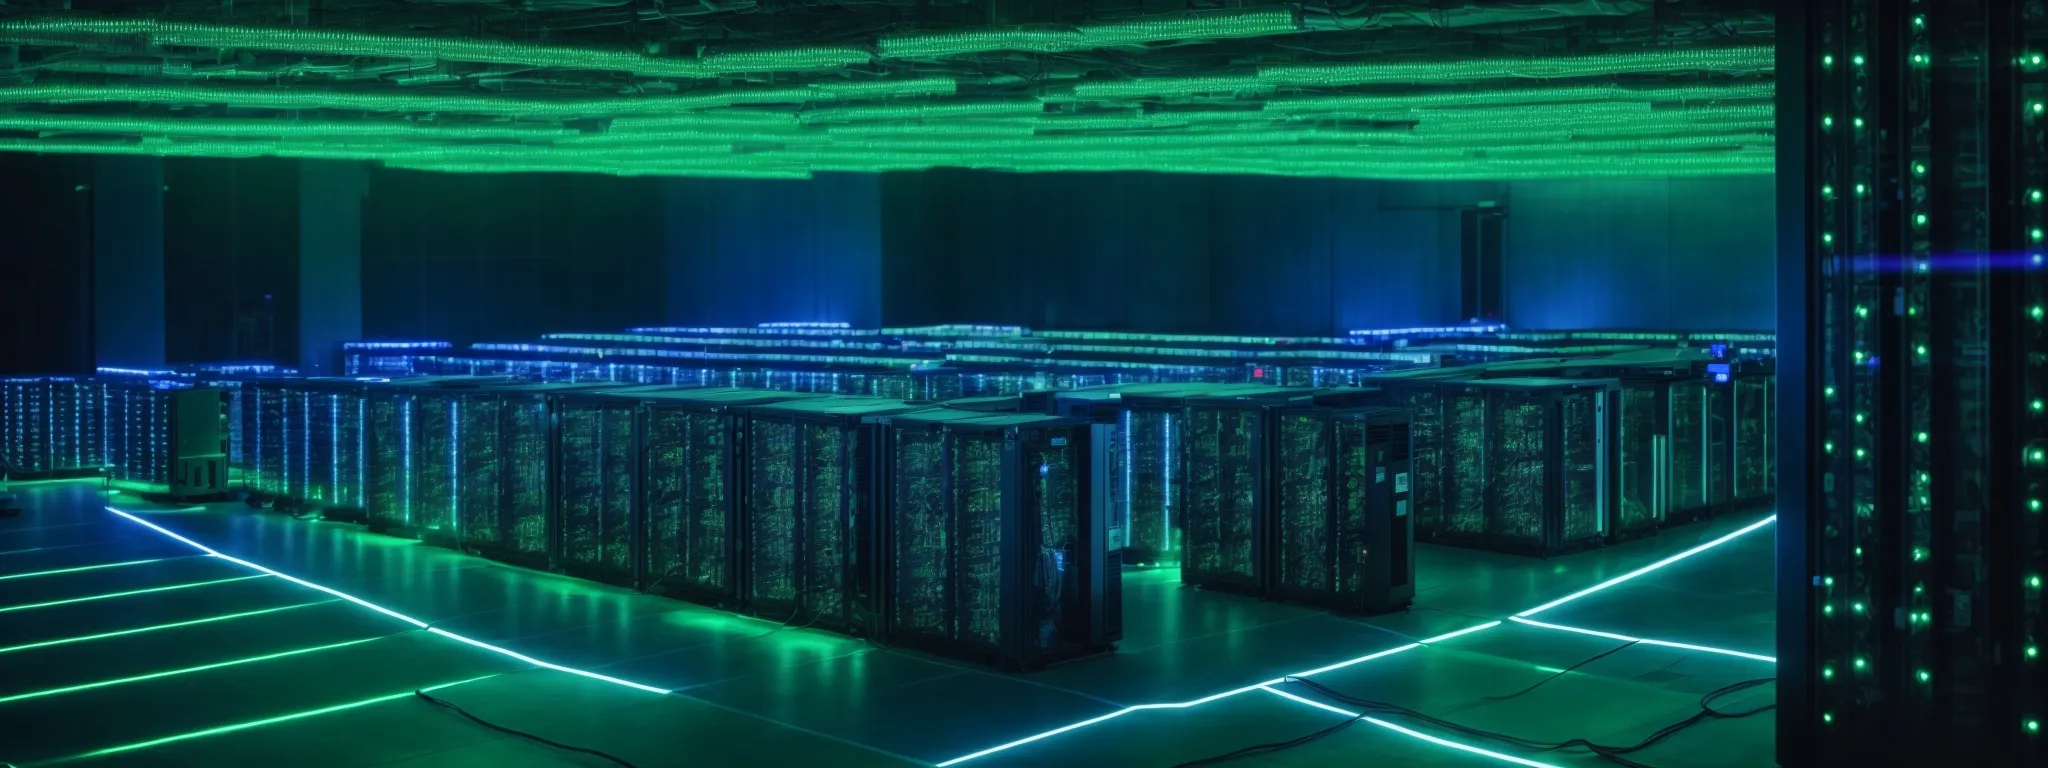 a panoramic view of a bustling data center with rows of server racks lit by blue and green led lights.